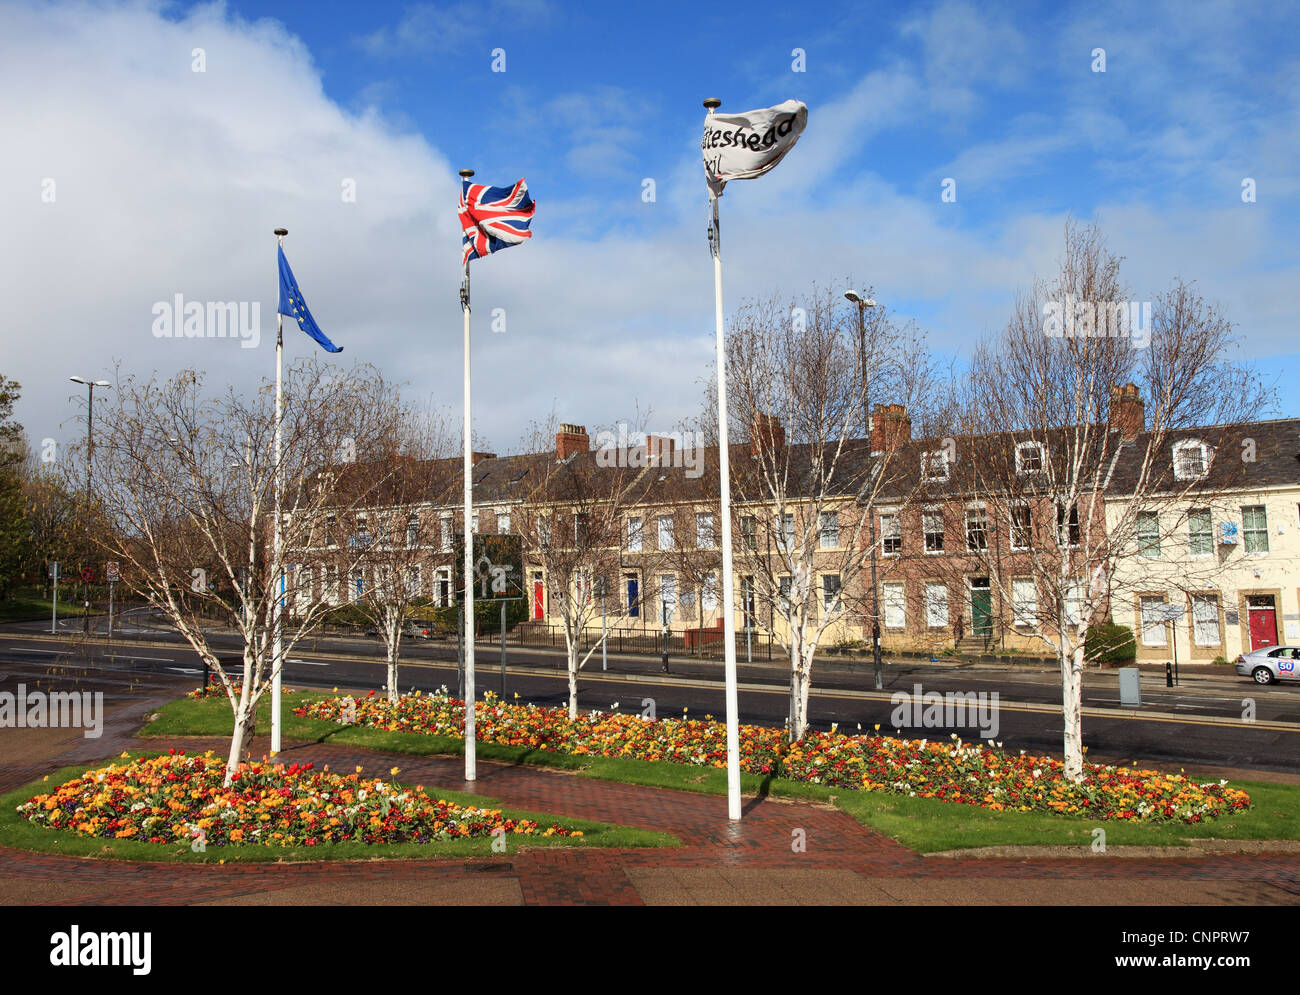 Spring flowers display and flags flying outside Gateshead Civic Centre, north east England UK Stock Photo